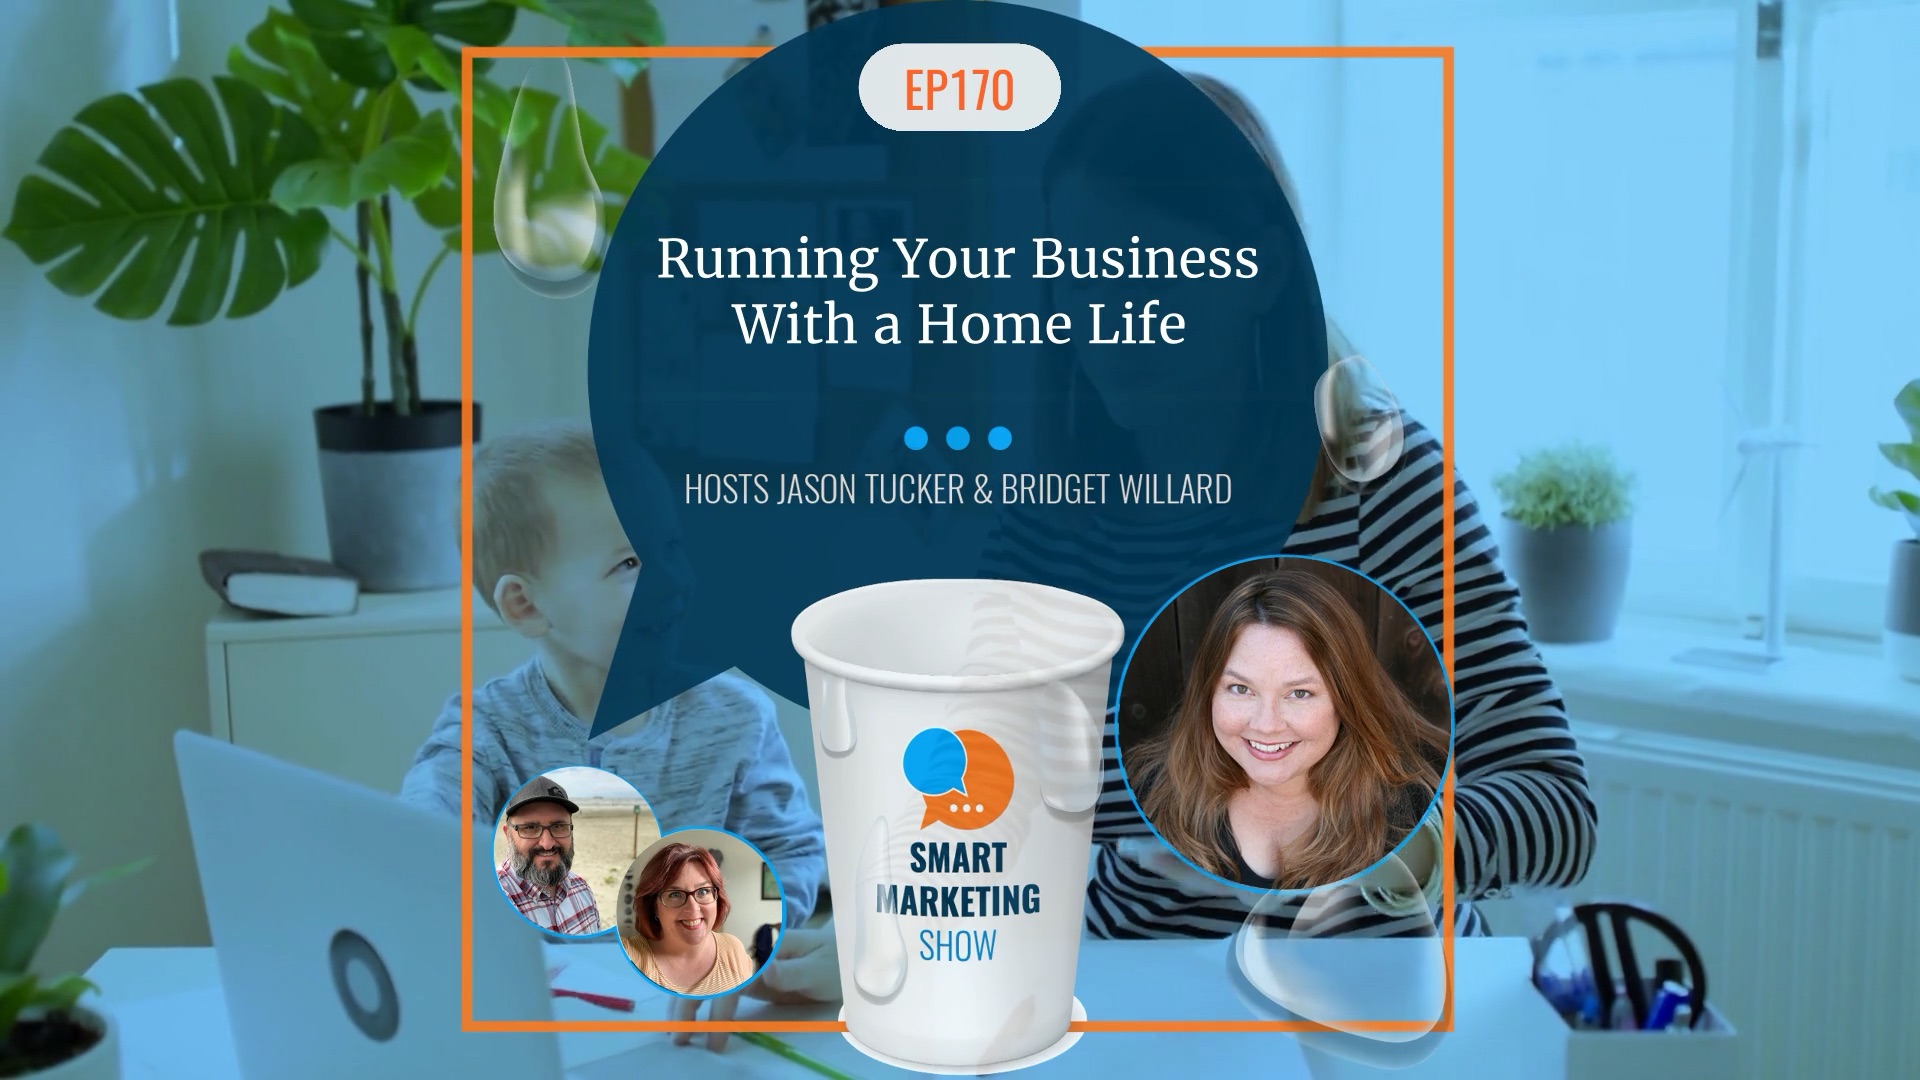 EP170 – Running Your Business With a Home Life